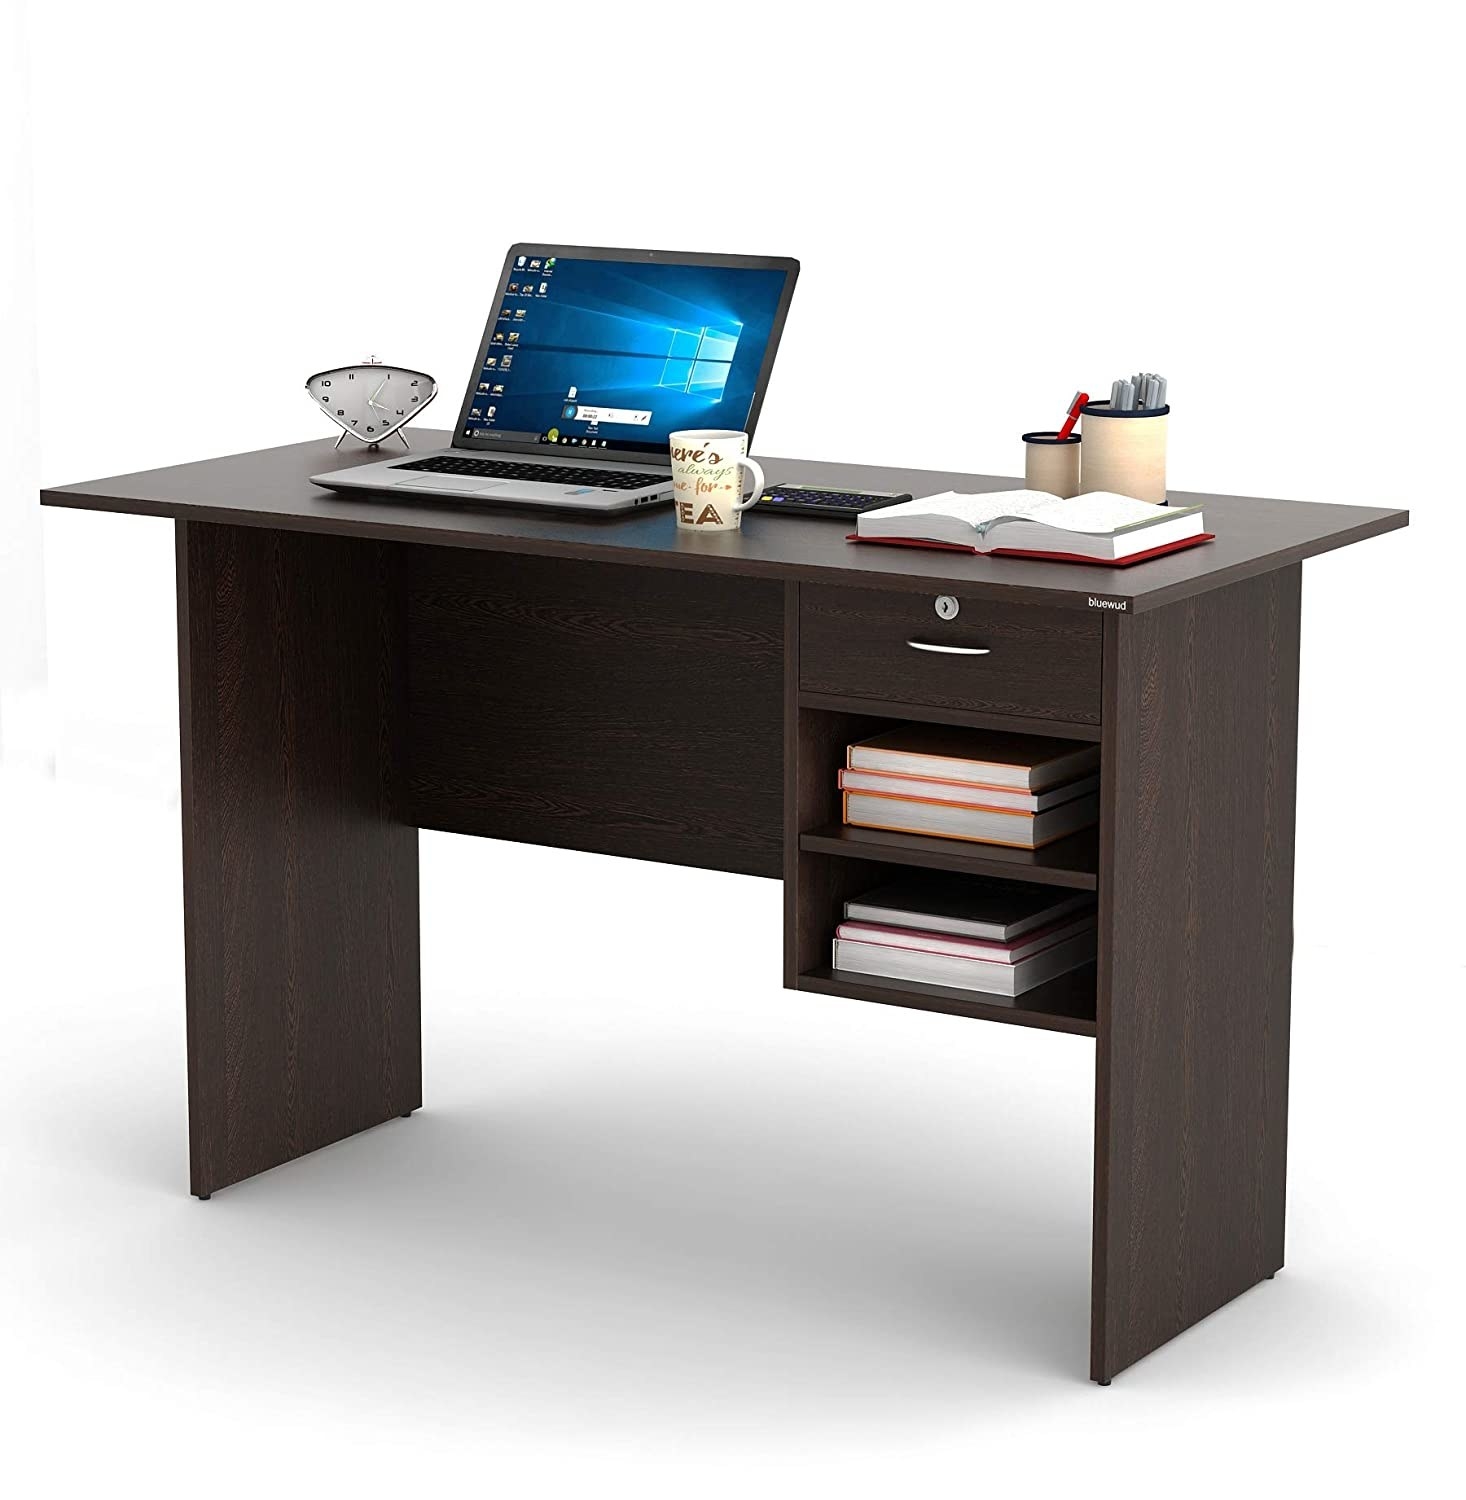 A desk with books and a laptop on it